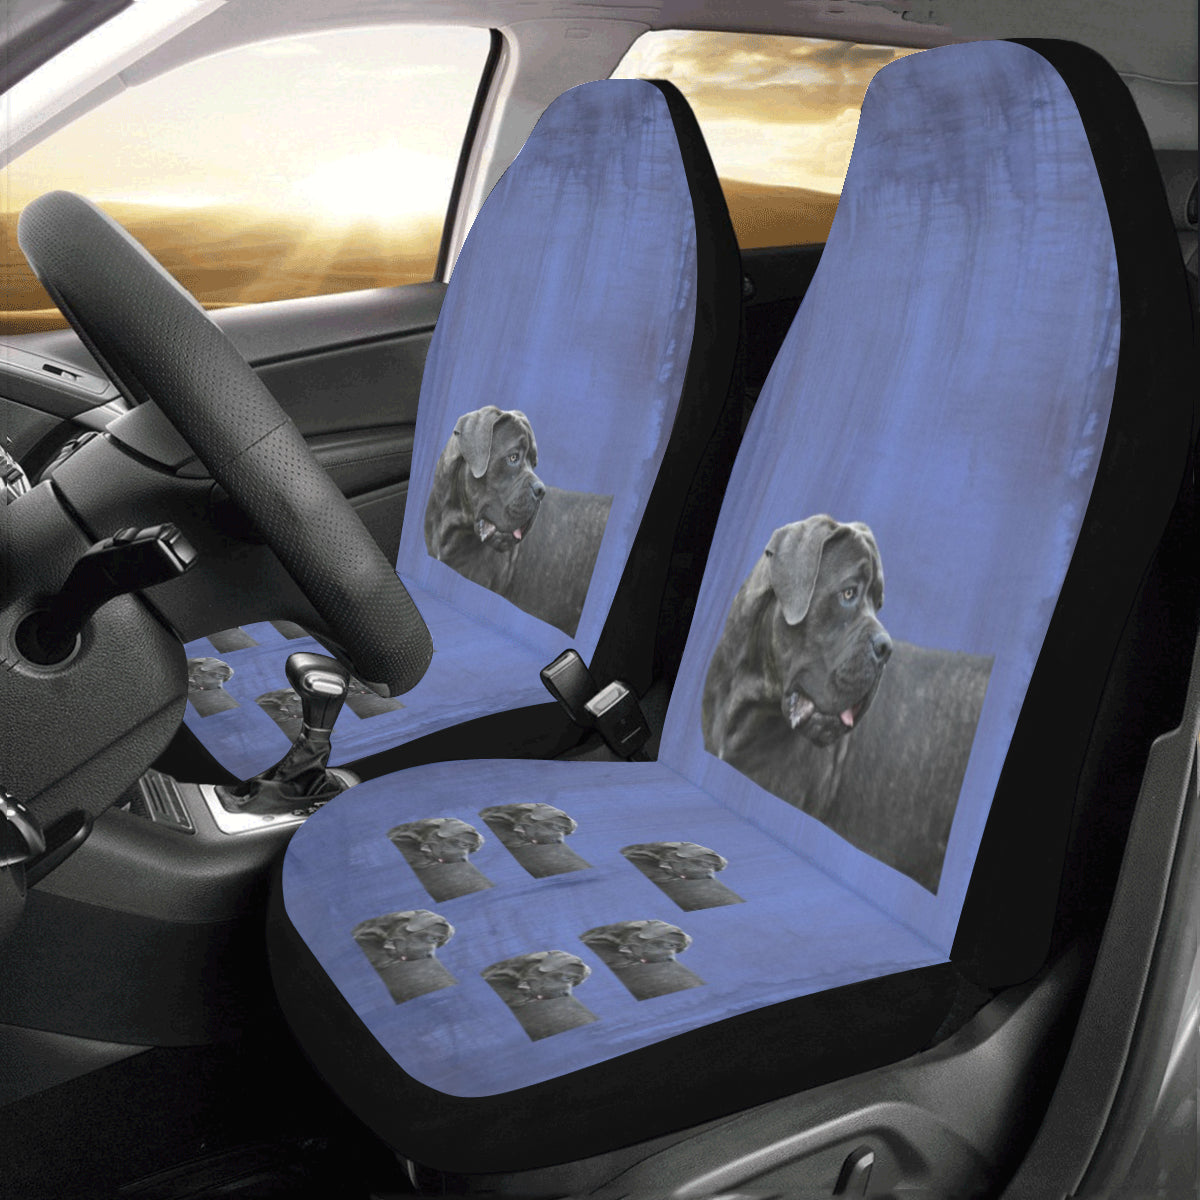 Cane Corso Car Seat Covers (Set of 2)